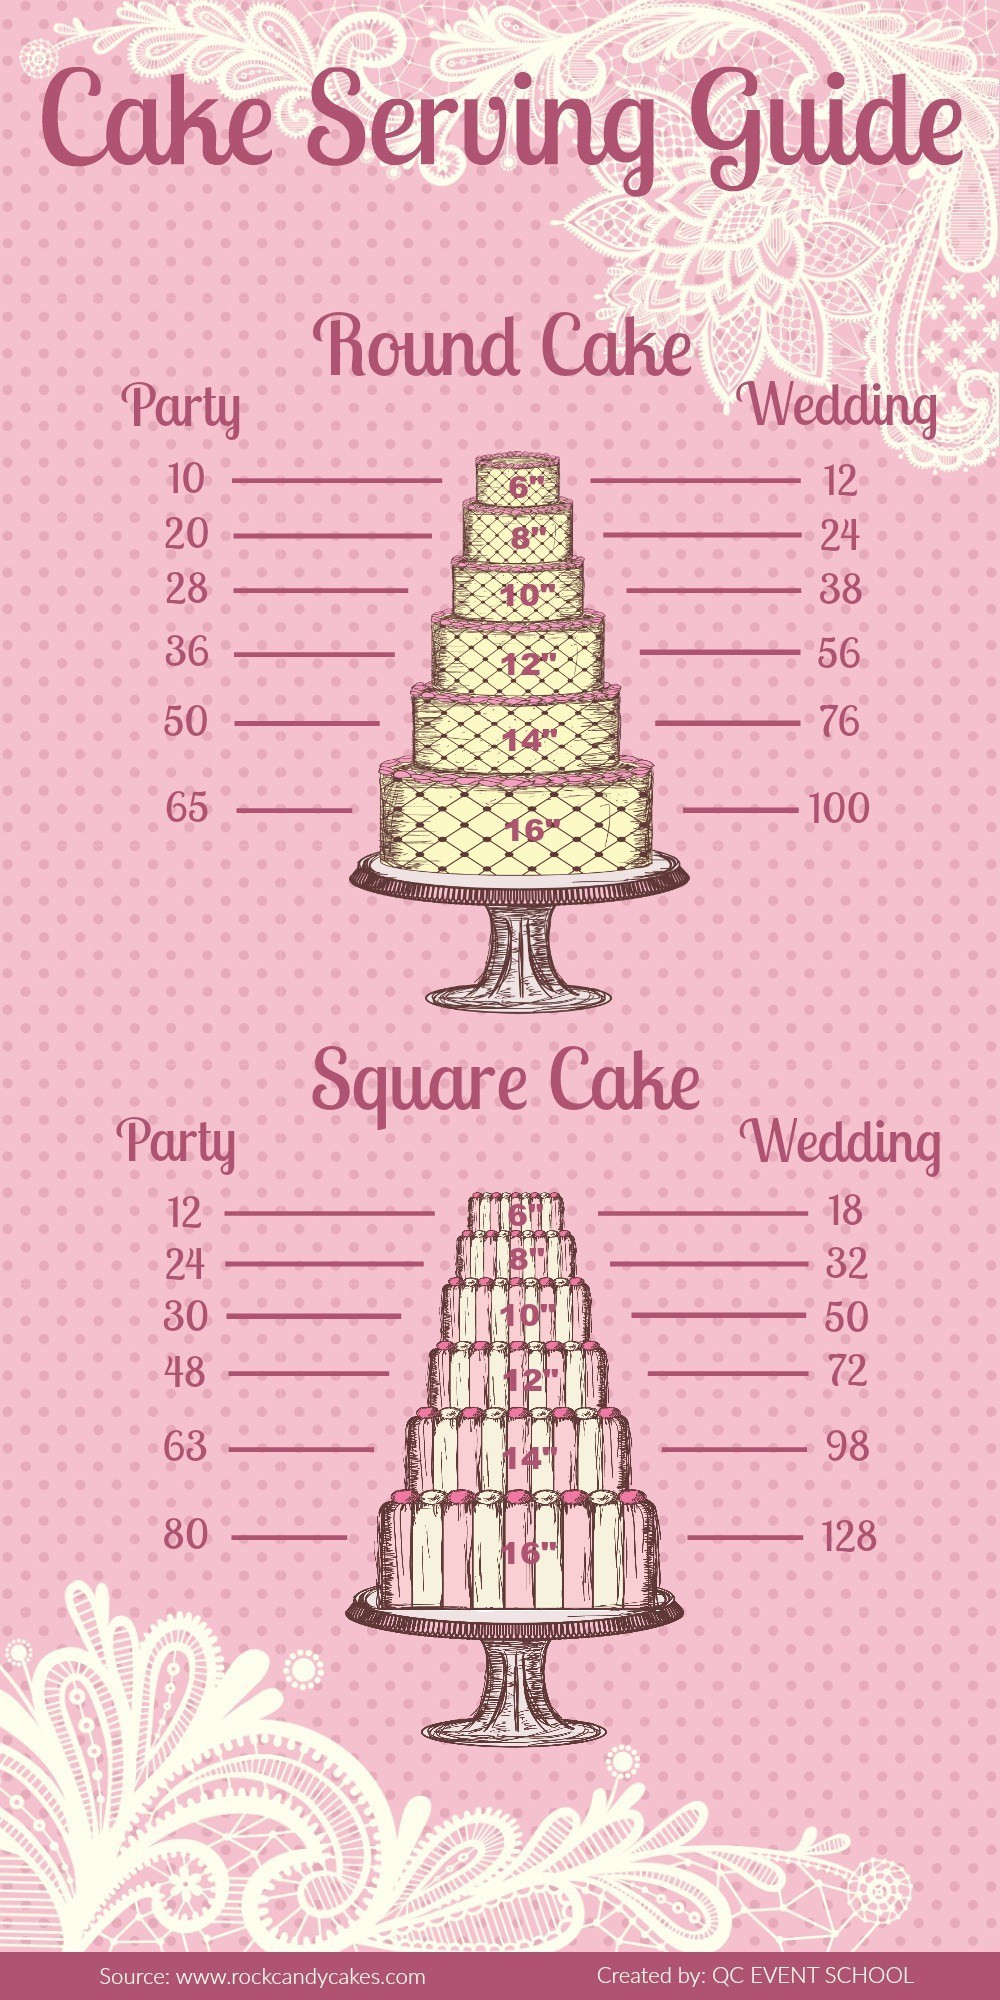 Wedding Cakes Servings
 Cake Serving Guide